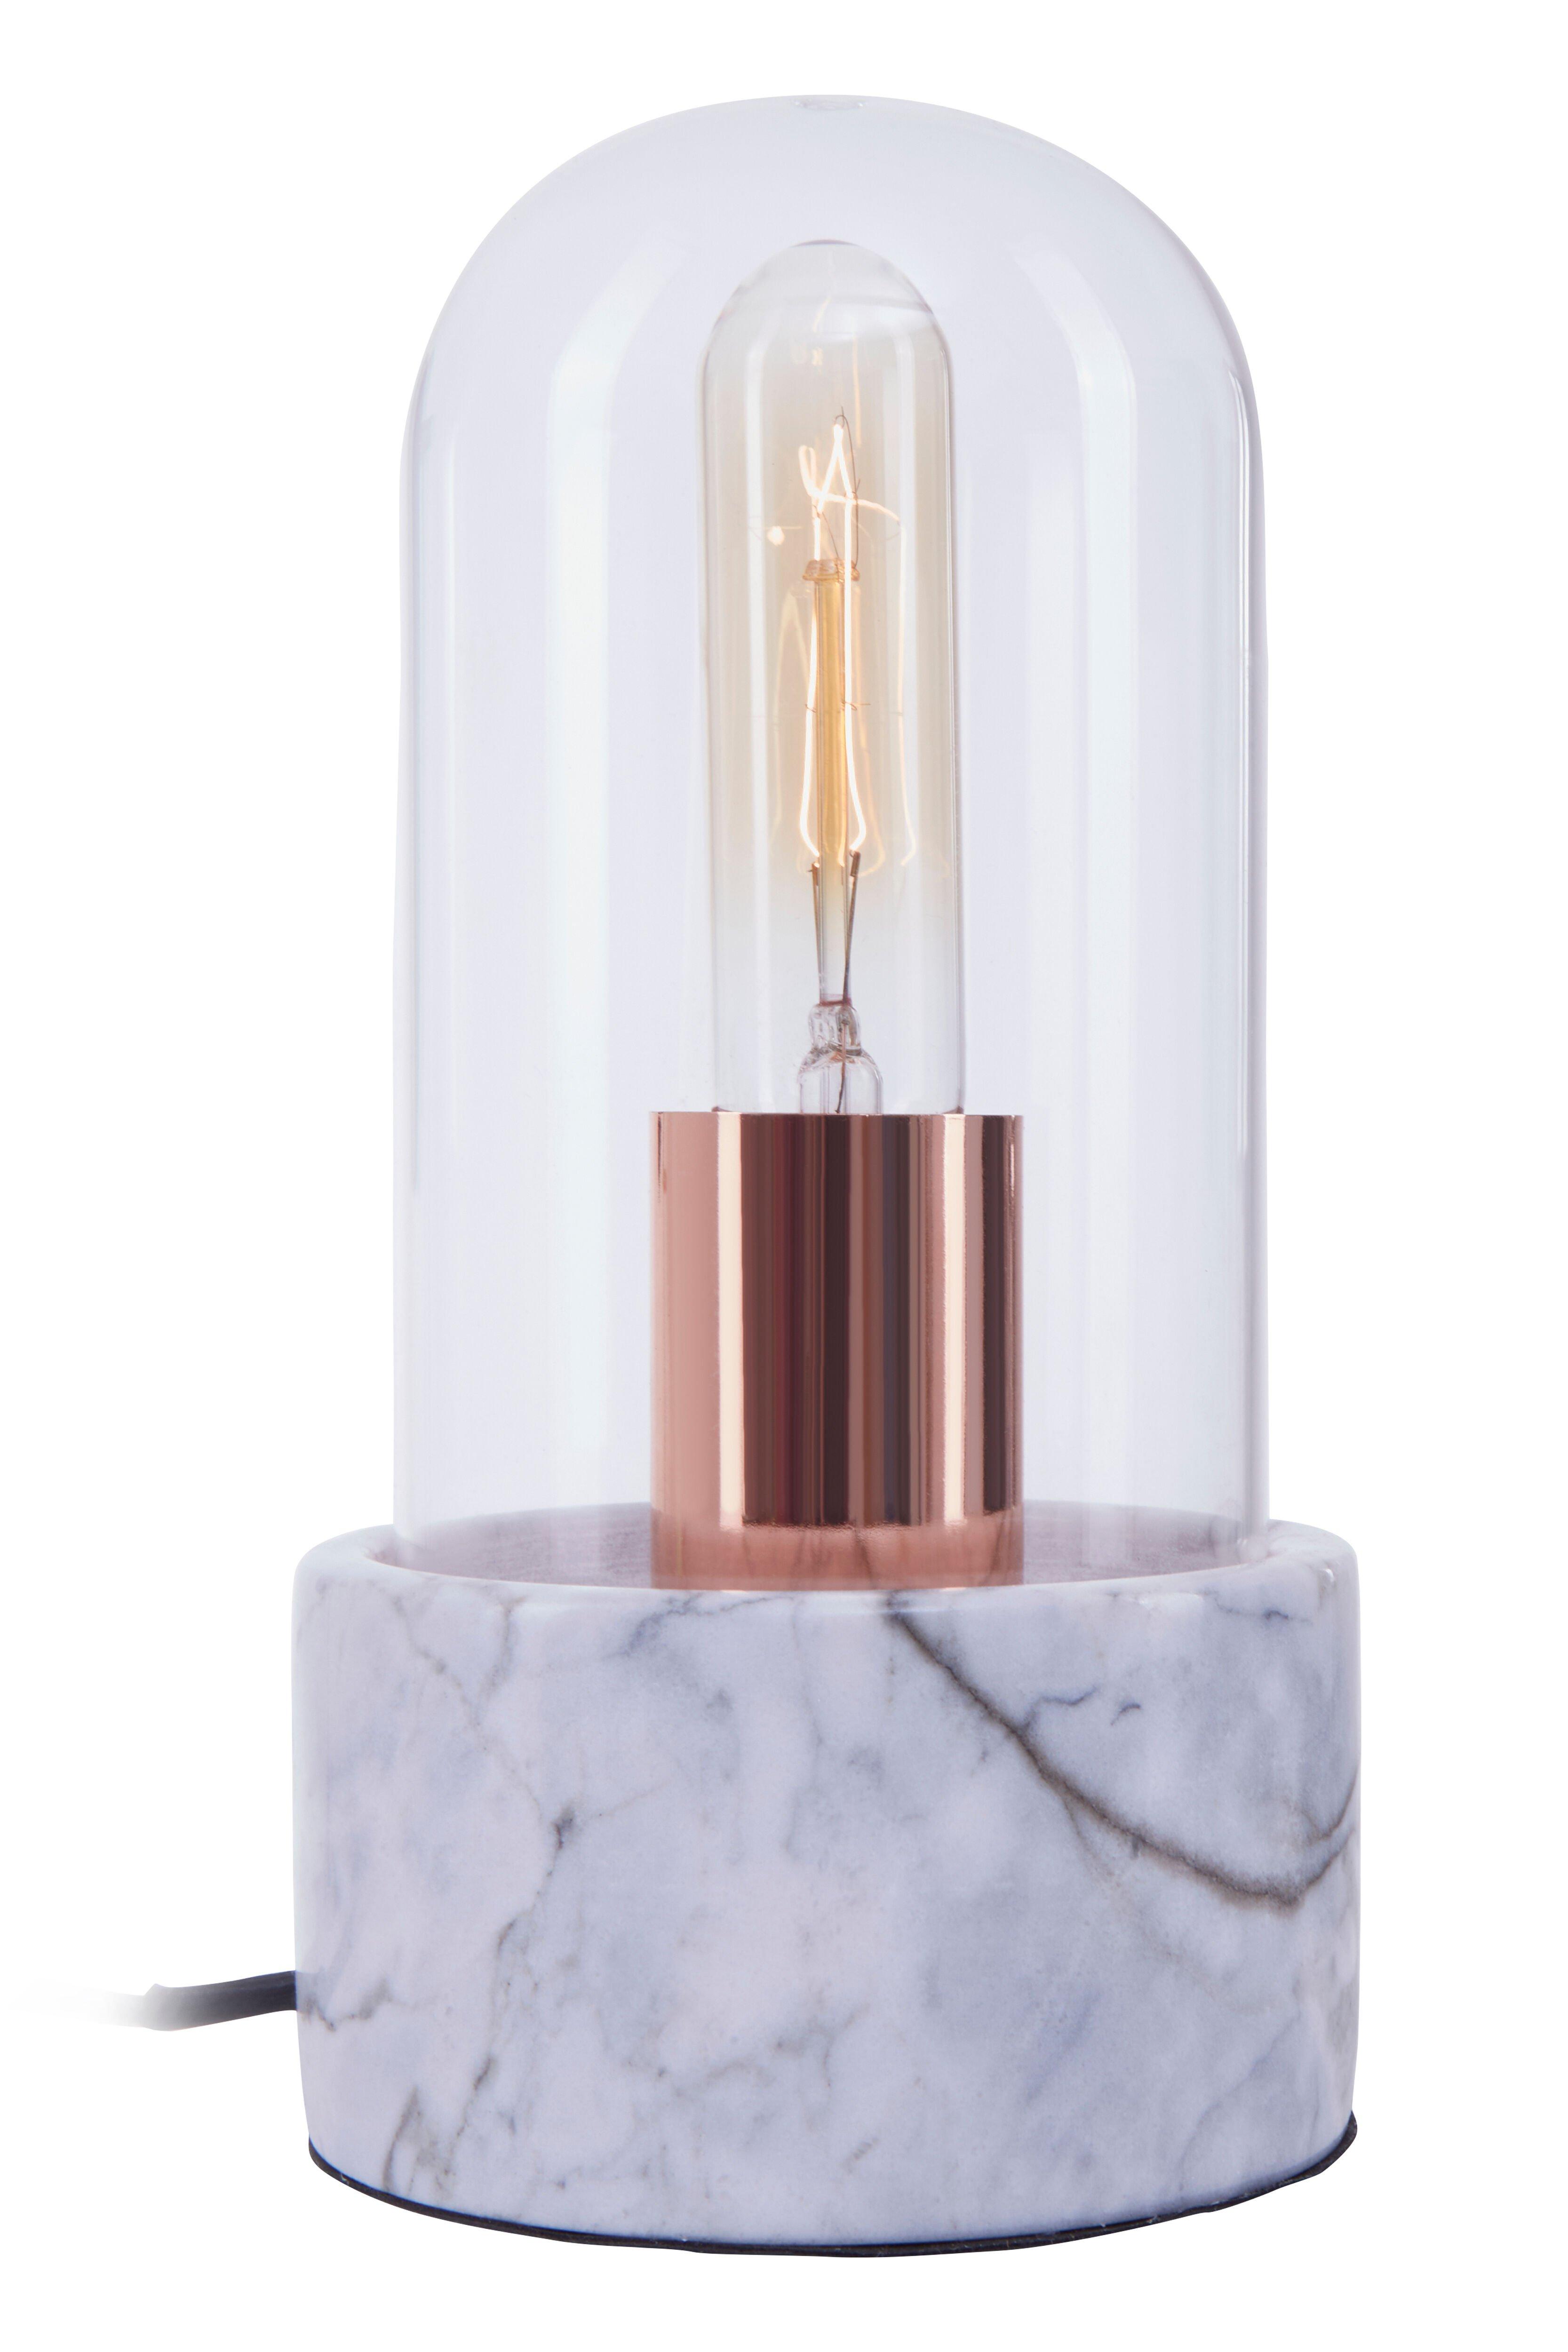 Interiors by Premier Lamonte Marble Base Bell Lamp